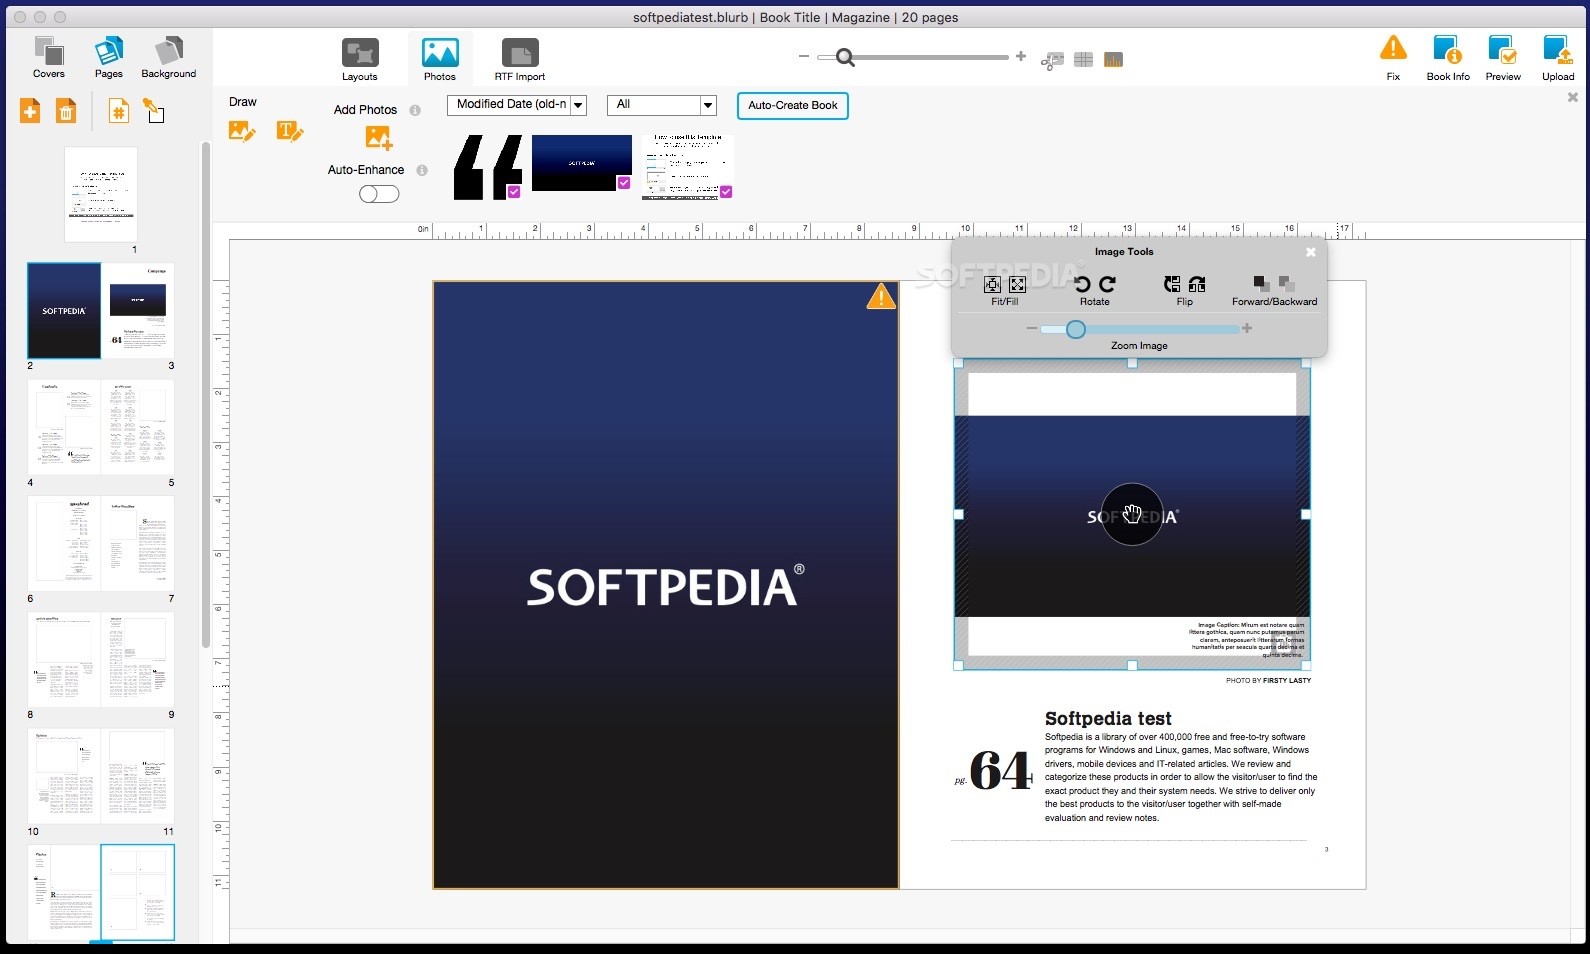 download bookwright for mac